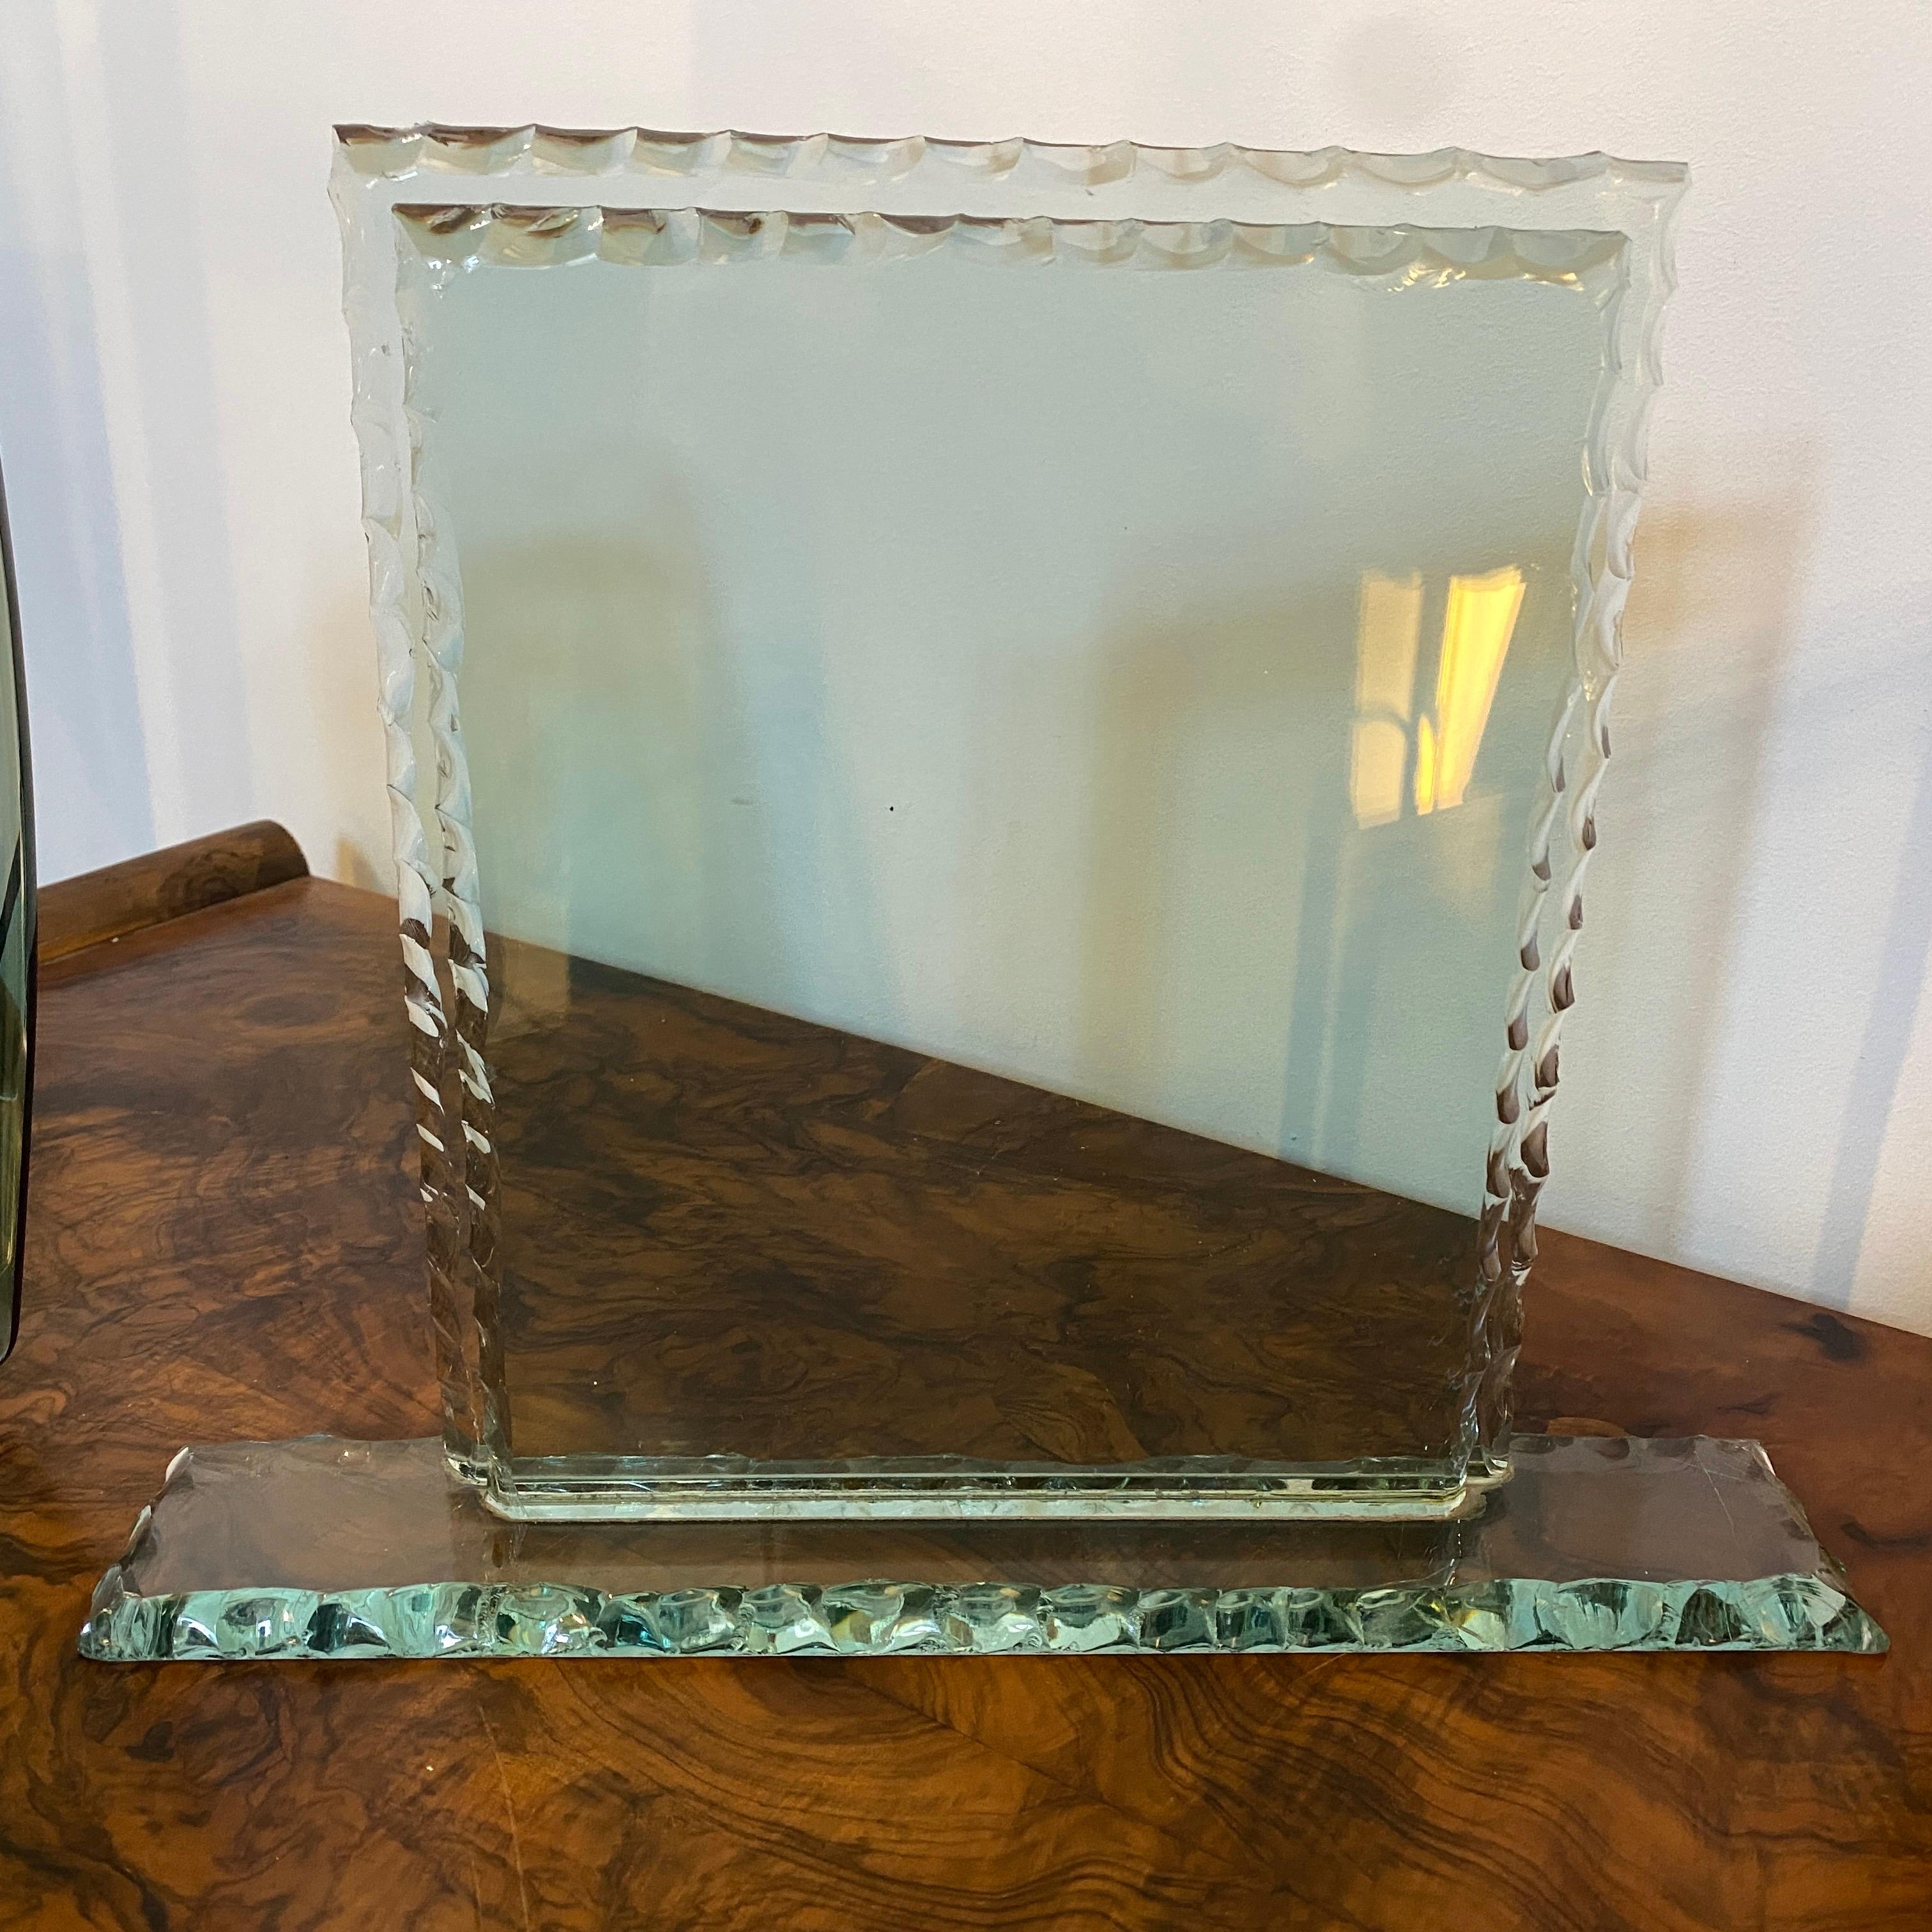 A stylish heavy Verde Nilo glass picutre frame designed and manufactured in Italy in the Fifties by Fontana Arte in very good conditions. The picture frame it's a stunning and unique piece of vintage Italian design. Fontana Arte is a well-known